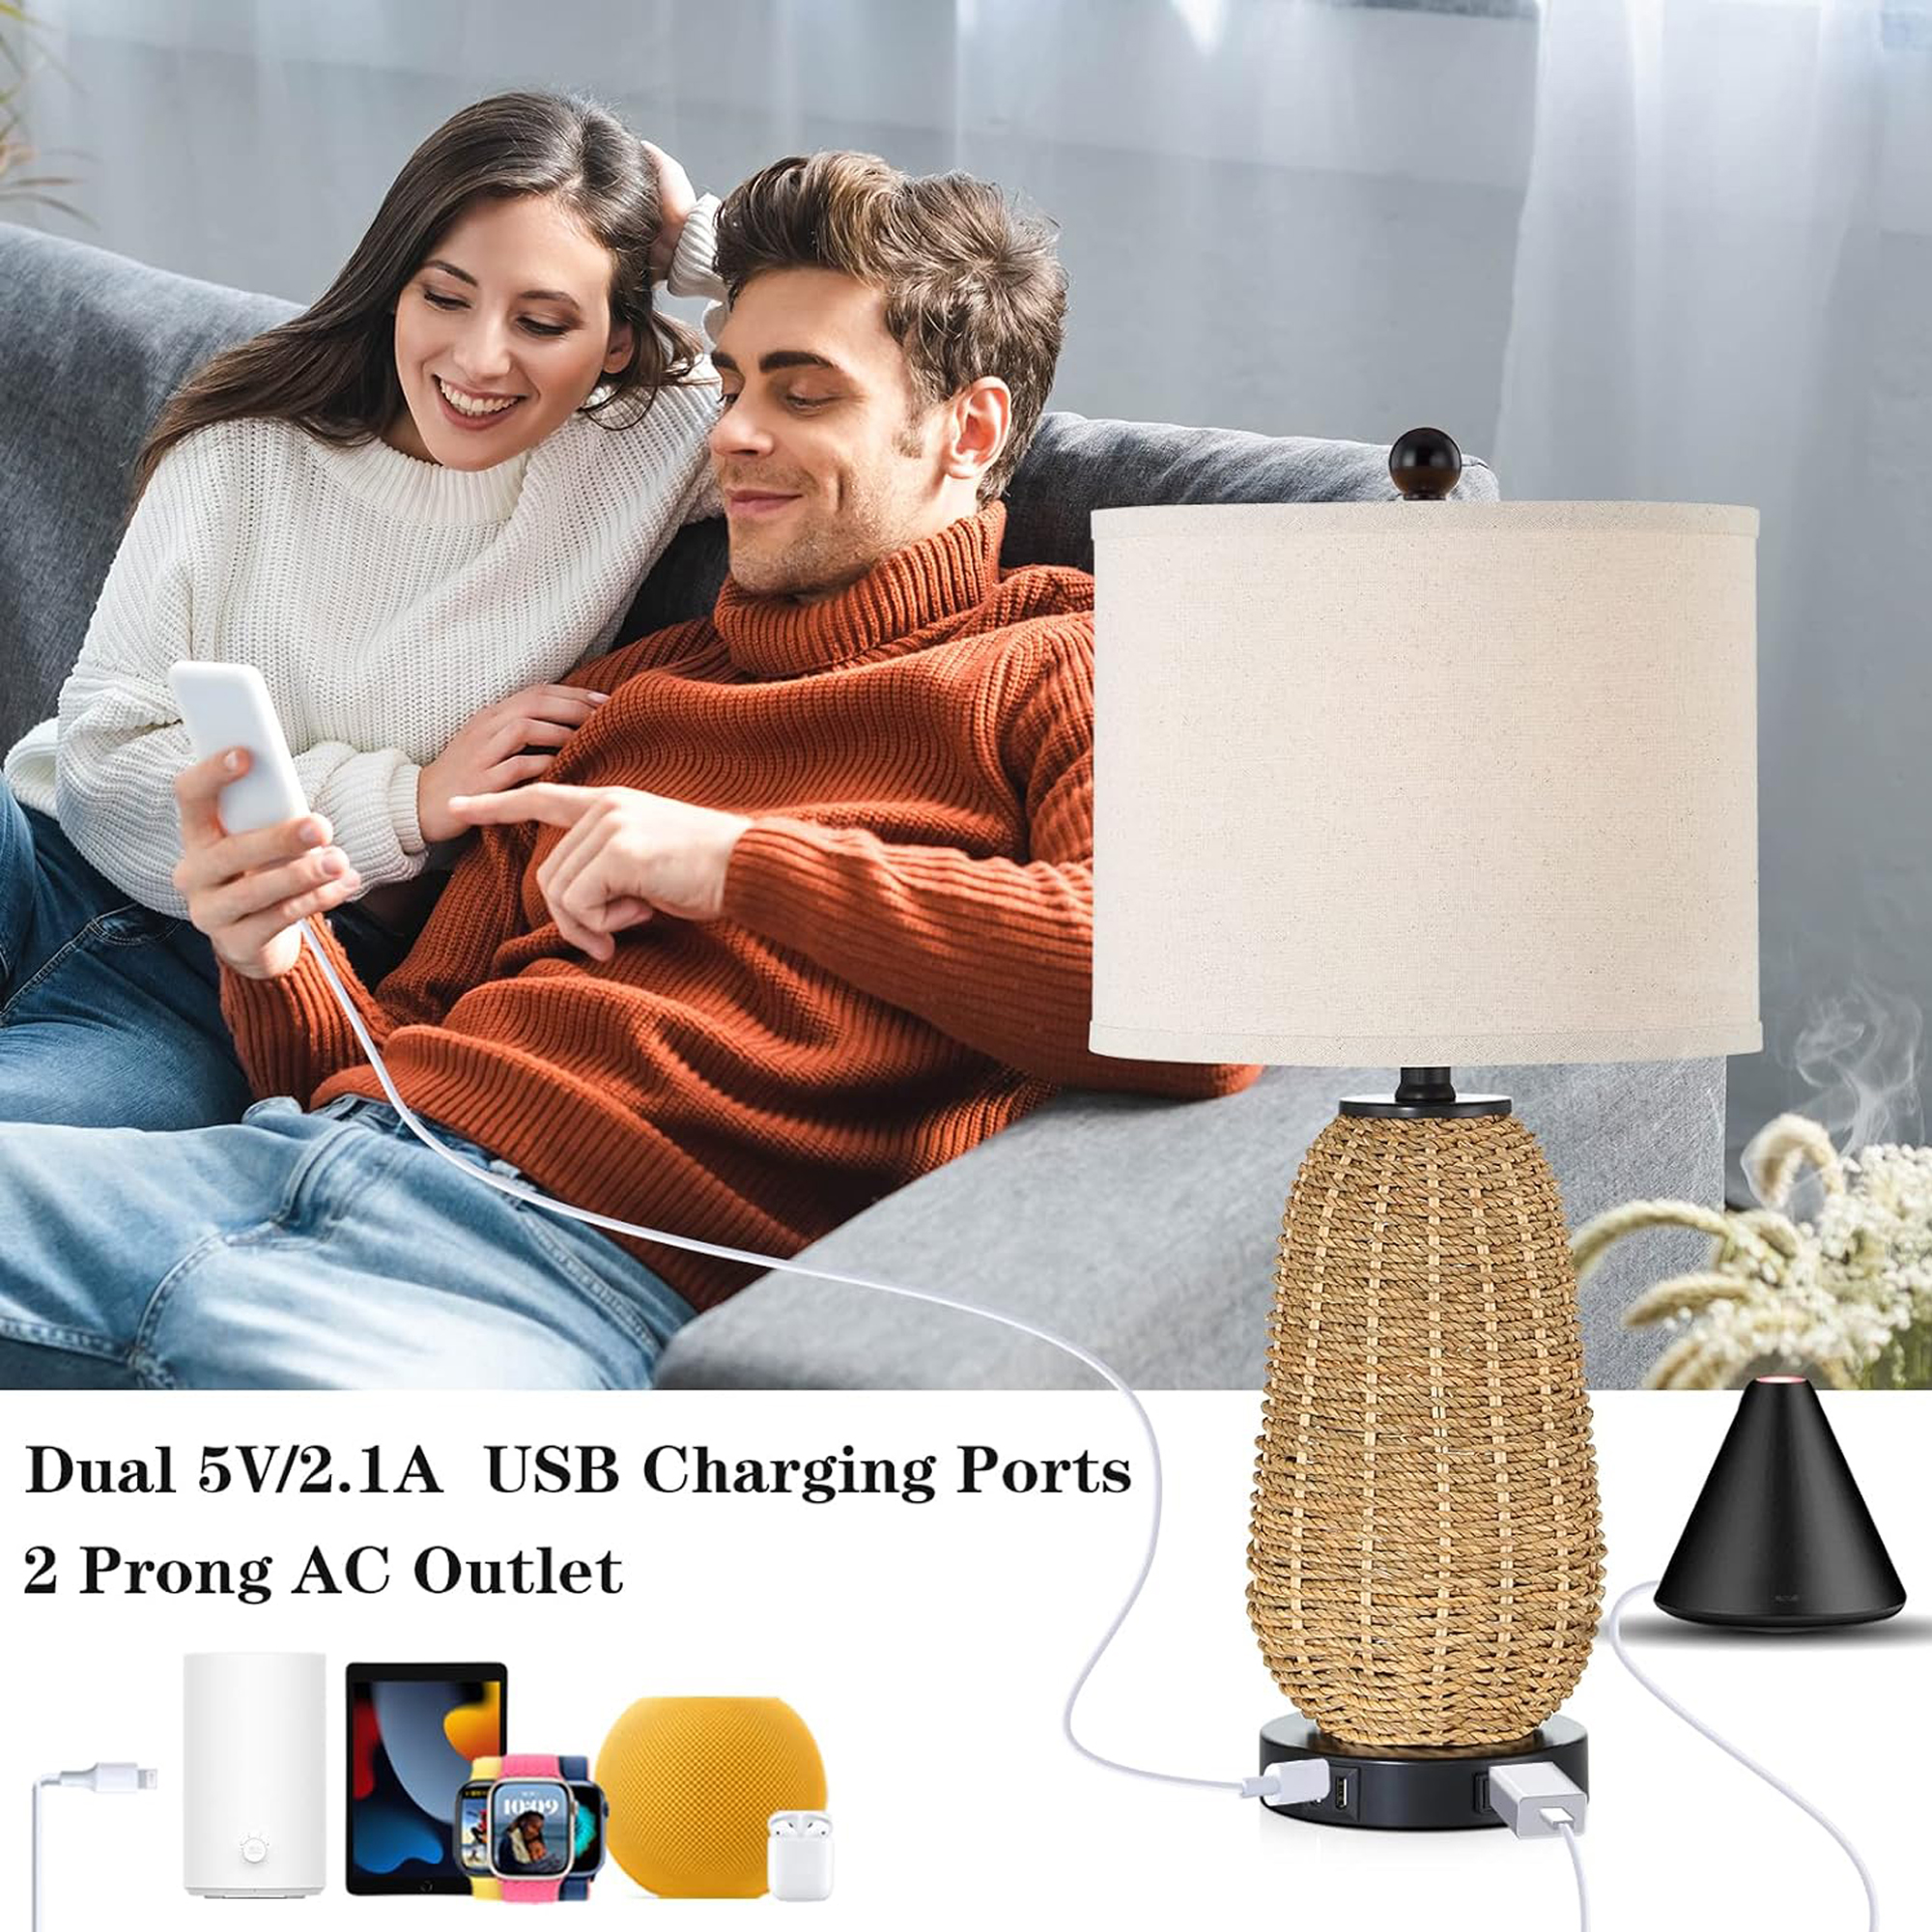 Cinkeda 3 Way Dimmable Touch Control Table Lamps Set of 2 for Living Room Bedroom Farmhouse Oatmeal Braided Rattan Bedside Nightstand Lamp with USB Ports AC Outlet(2 Bulb) - image 3 of 8